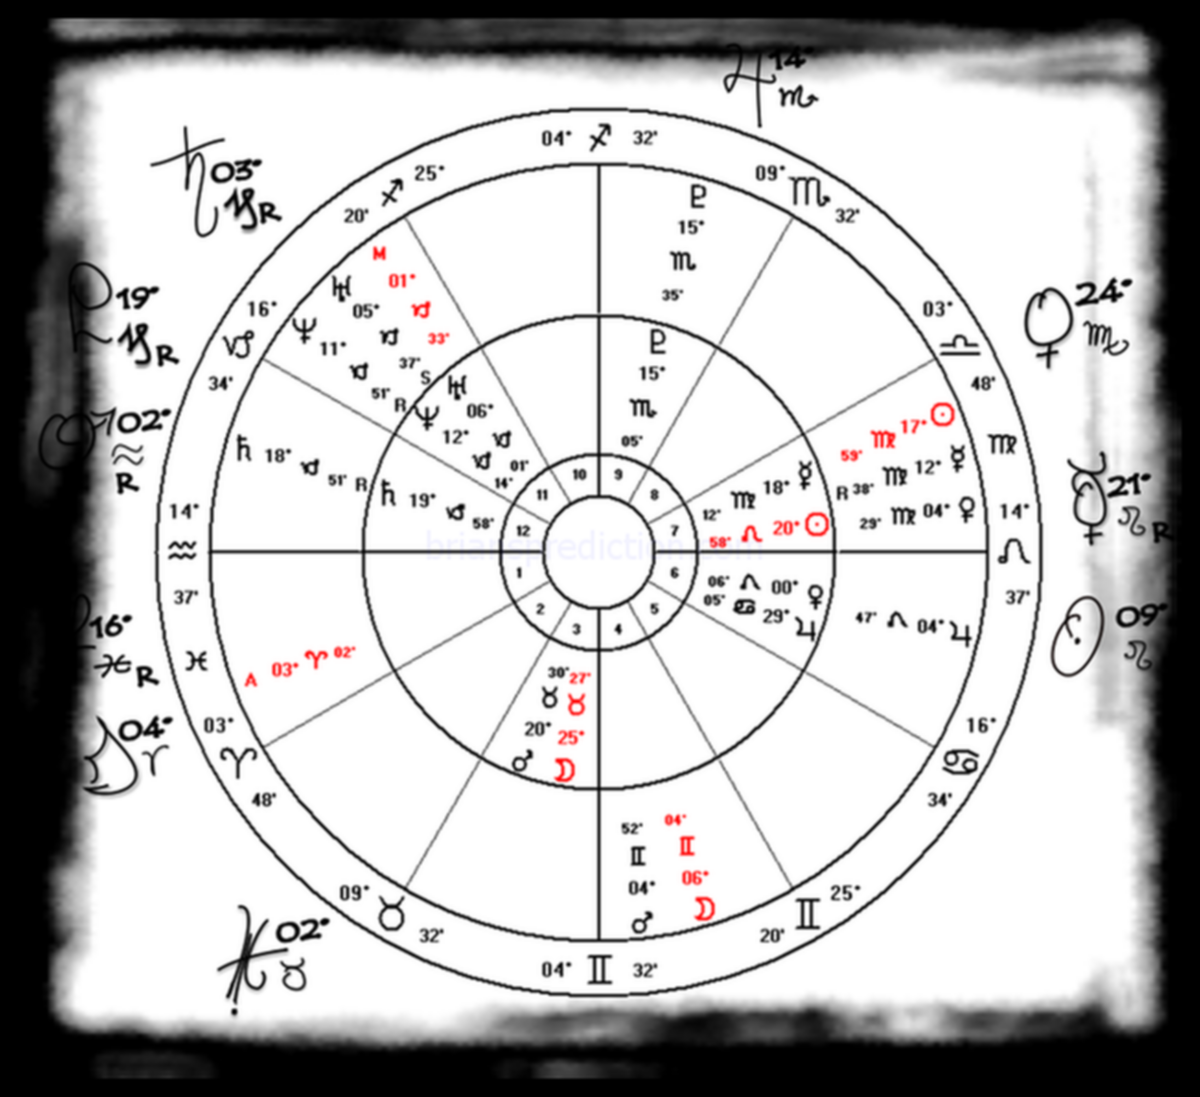 SAMANTHA SAYERS IS ALIVE SAMANTHA-SAYERS-BIRTH-CHART-WITH-PROGRESSIONS-WITH-TRANSITS 1 ORIG  PSYCHIC BRIAN LADD
SAMANTHA SAYERS IS ALIVE SAMANTHA-SAYERS-BIRTH-CHART-WITH-PROGRESSIONS-WITH-TRANSITS 1 ORIG  PSYCHIC BRIAN LADD
